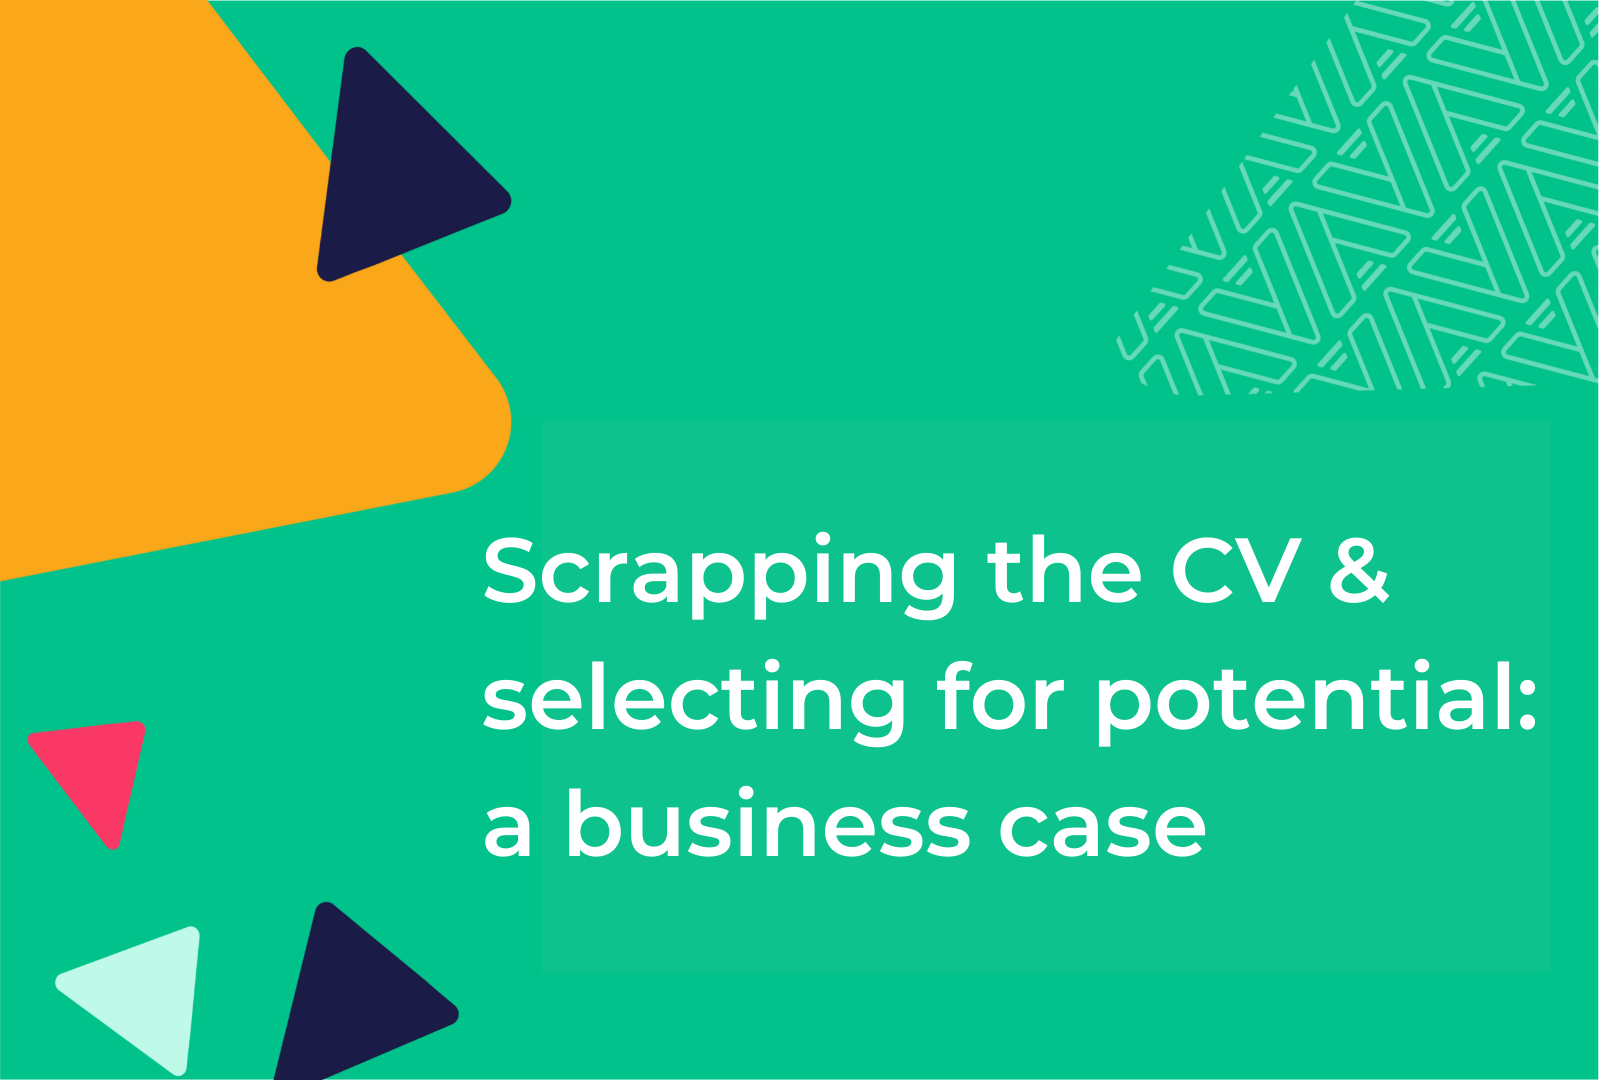 Scrapping the CV & selecting for potential: a business case